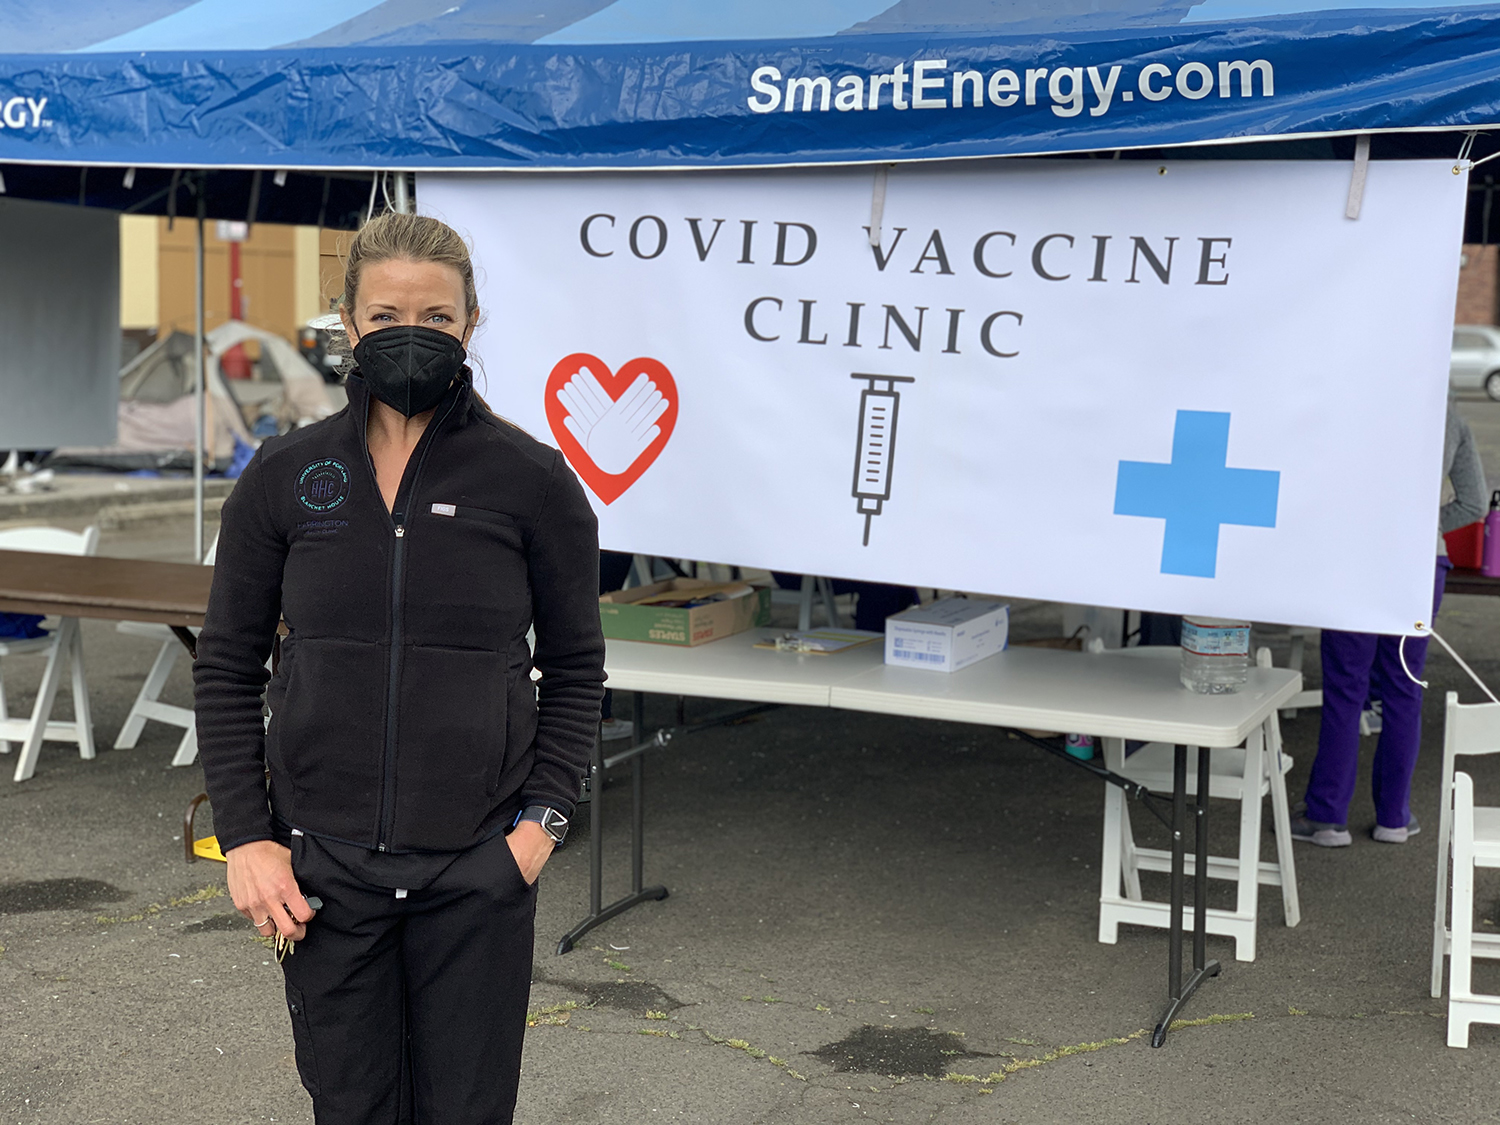 Walk-Up Outdoor COVID Vaccine Clinic for the Homeless and Temporarily Sheltered